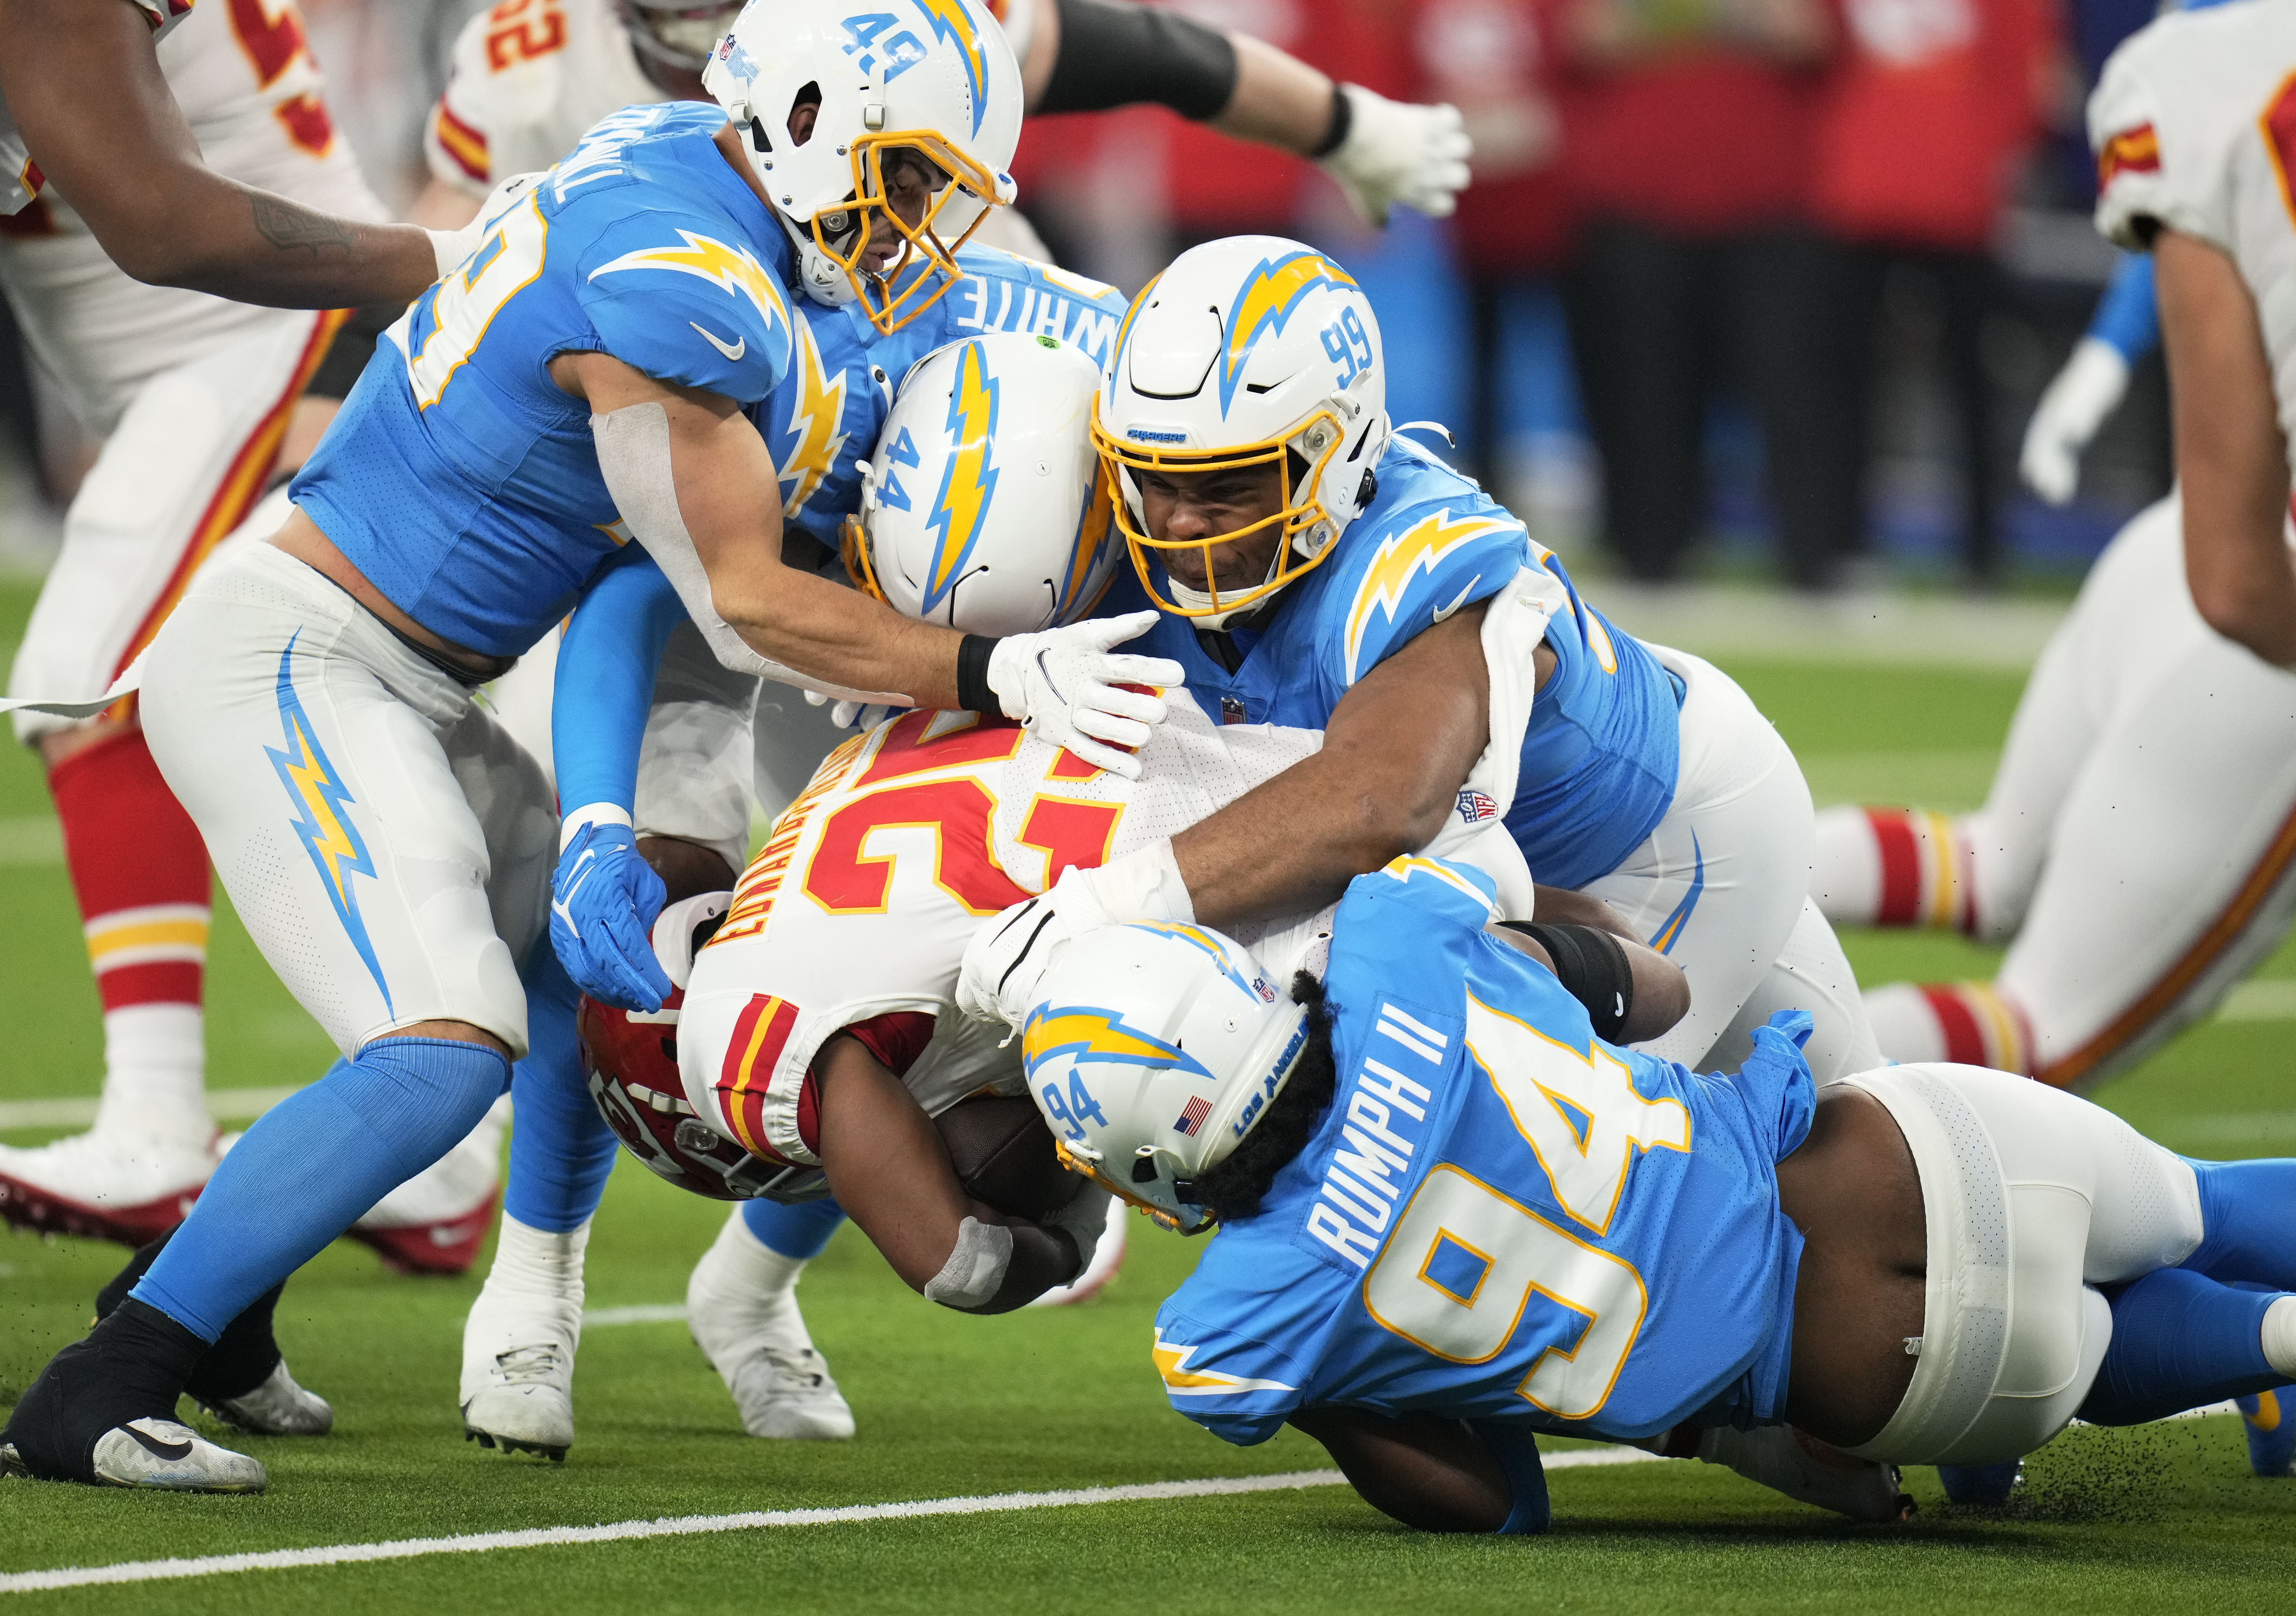 Kansas City Chiefs defeated the Los Angeles Chargers 34-28 in overtime during a NFL football game at SoFi Stadium in Inglewood.